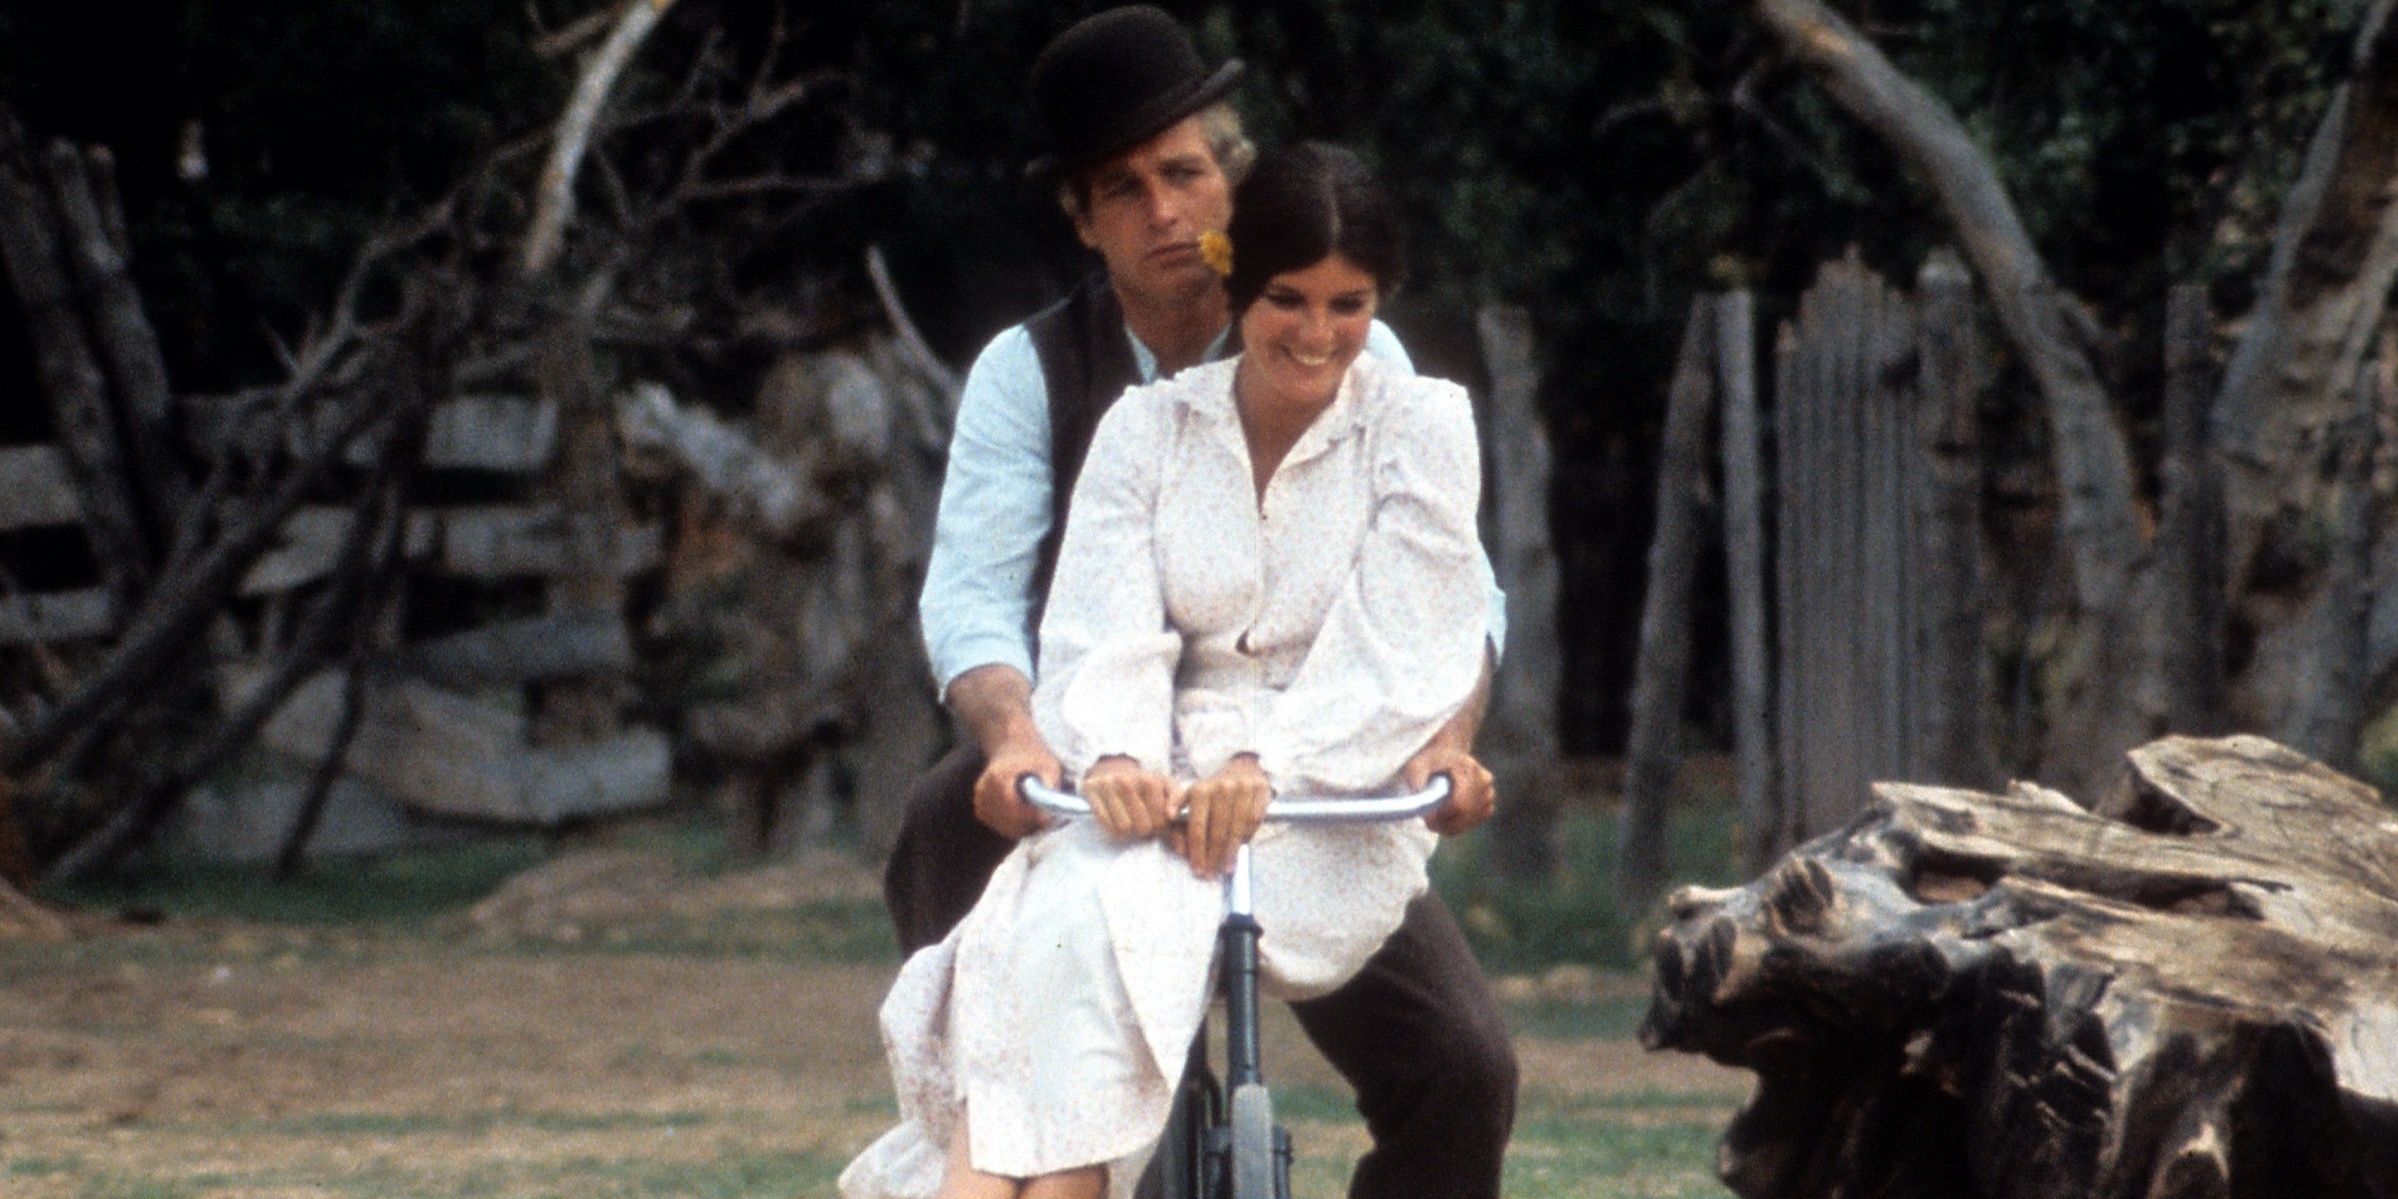 Butch gives Etta a bike ride in Butch Cassidy and the Sundance Kid